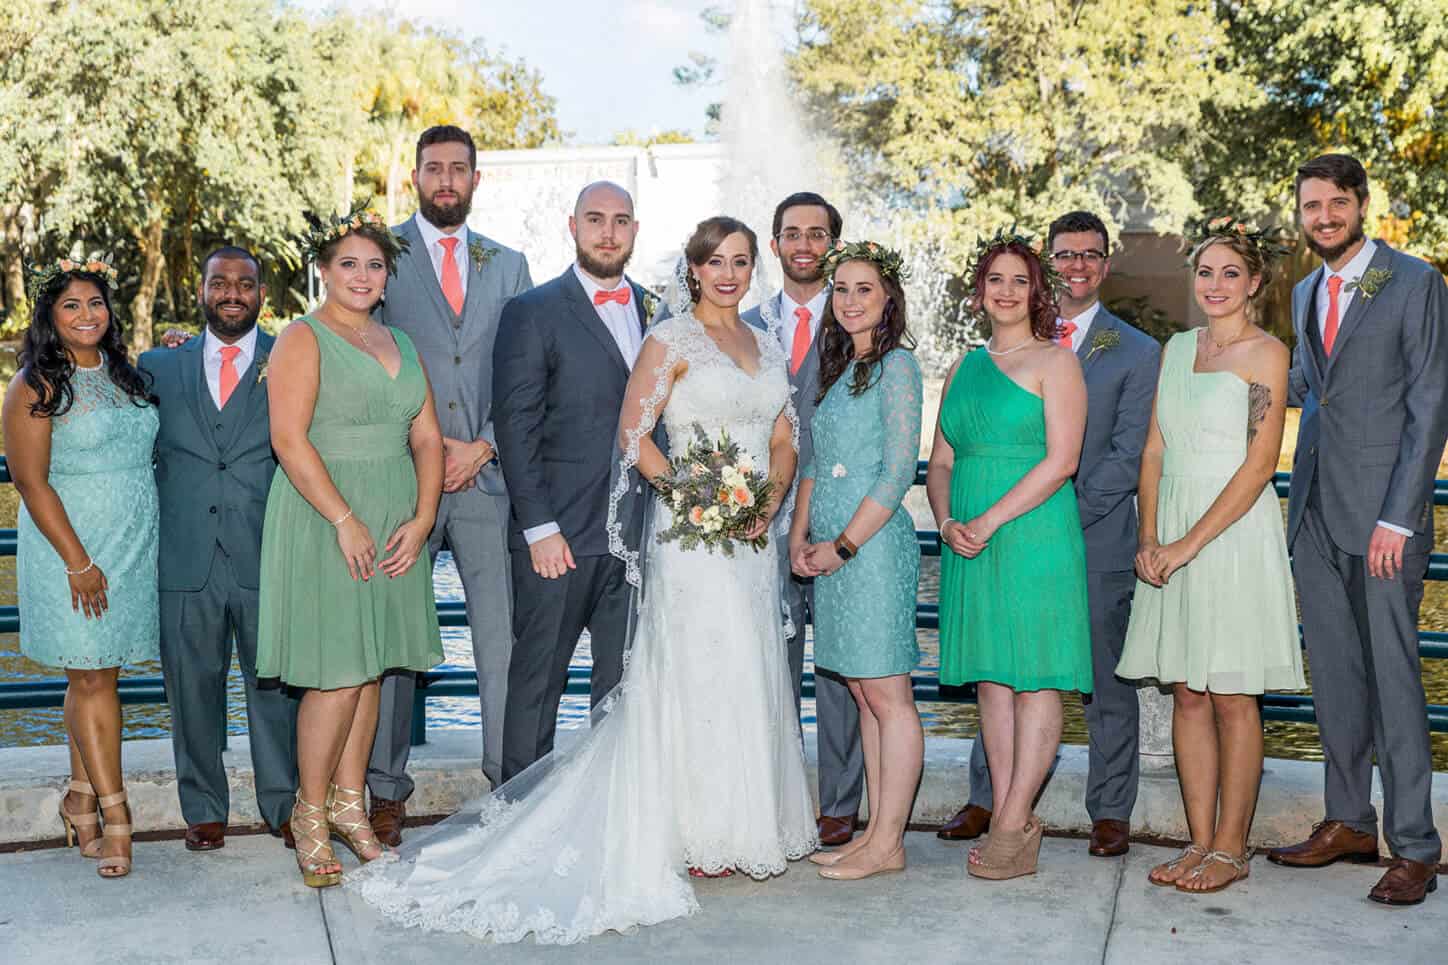 Wedding Party Photo of the Bide and Groom and all their attendants